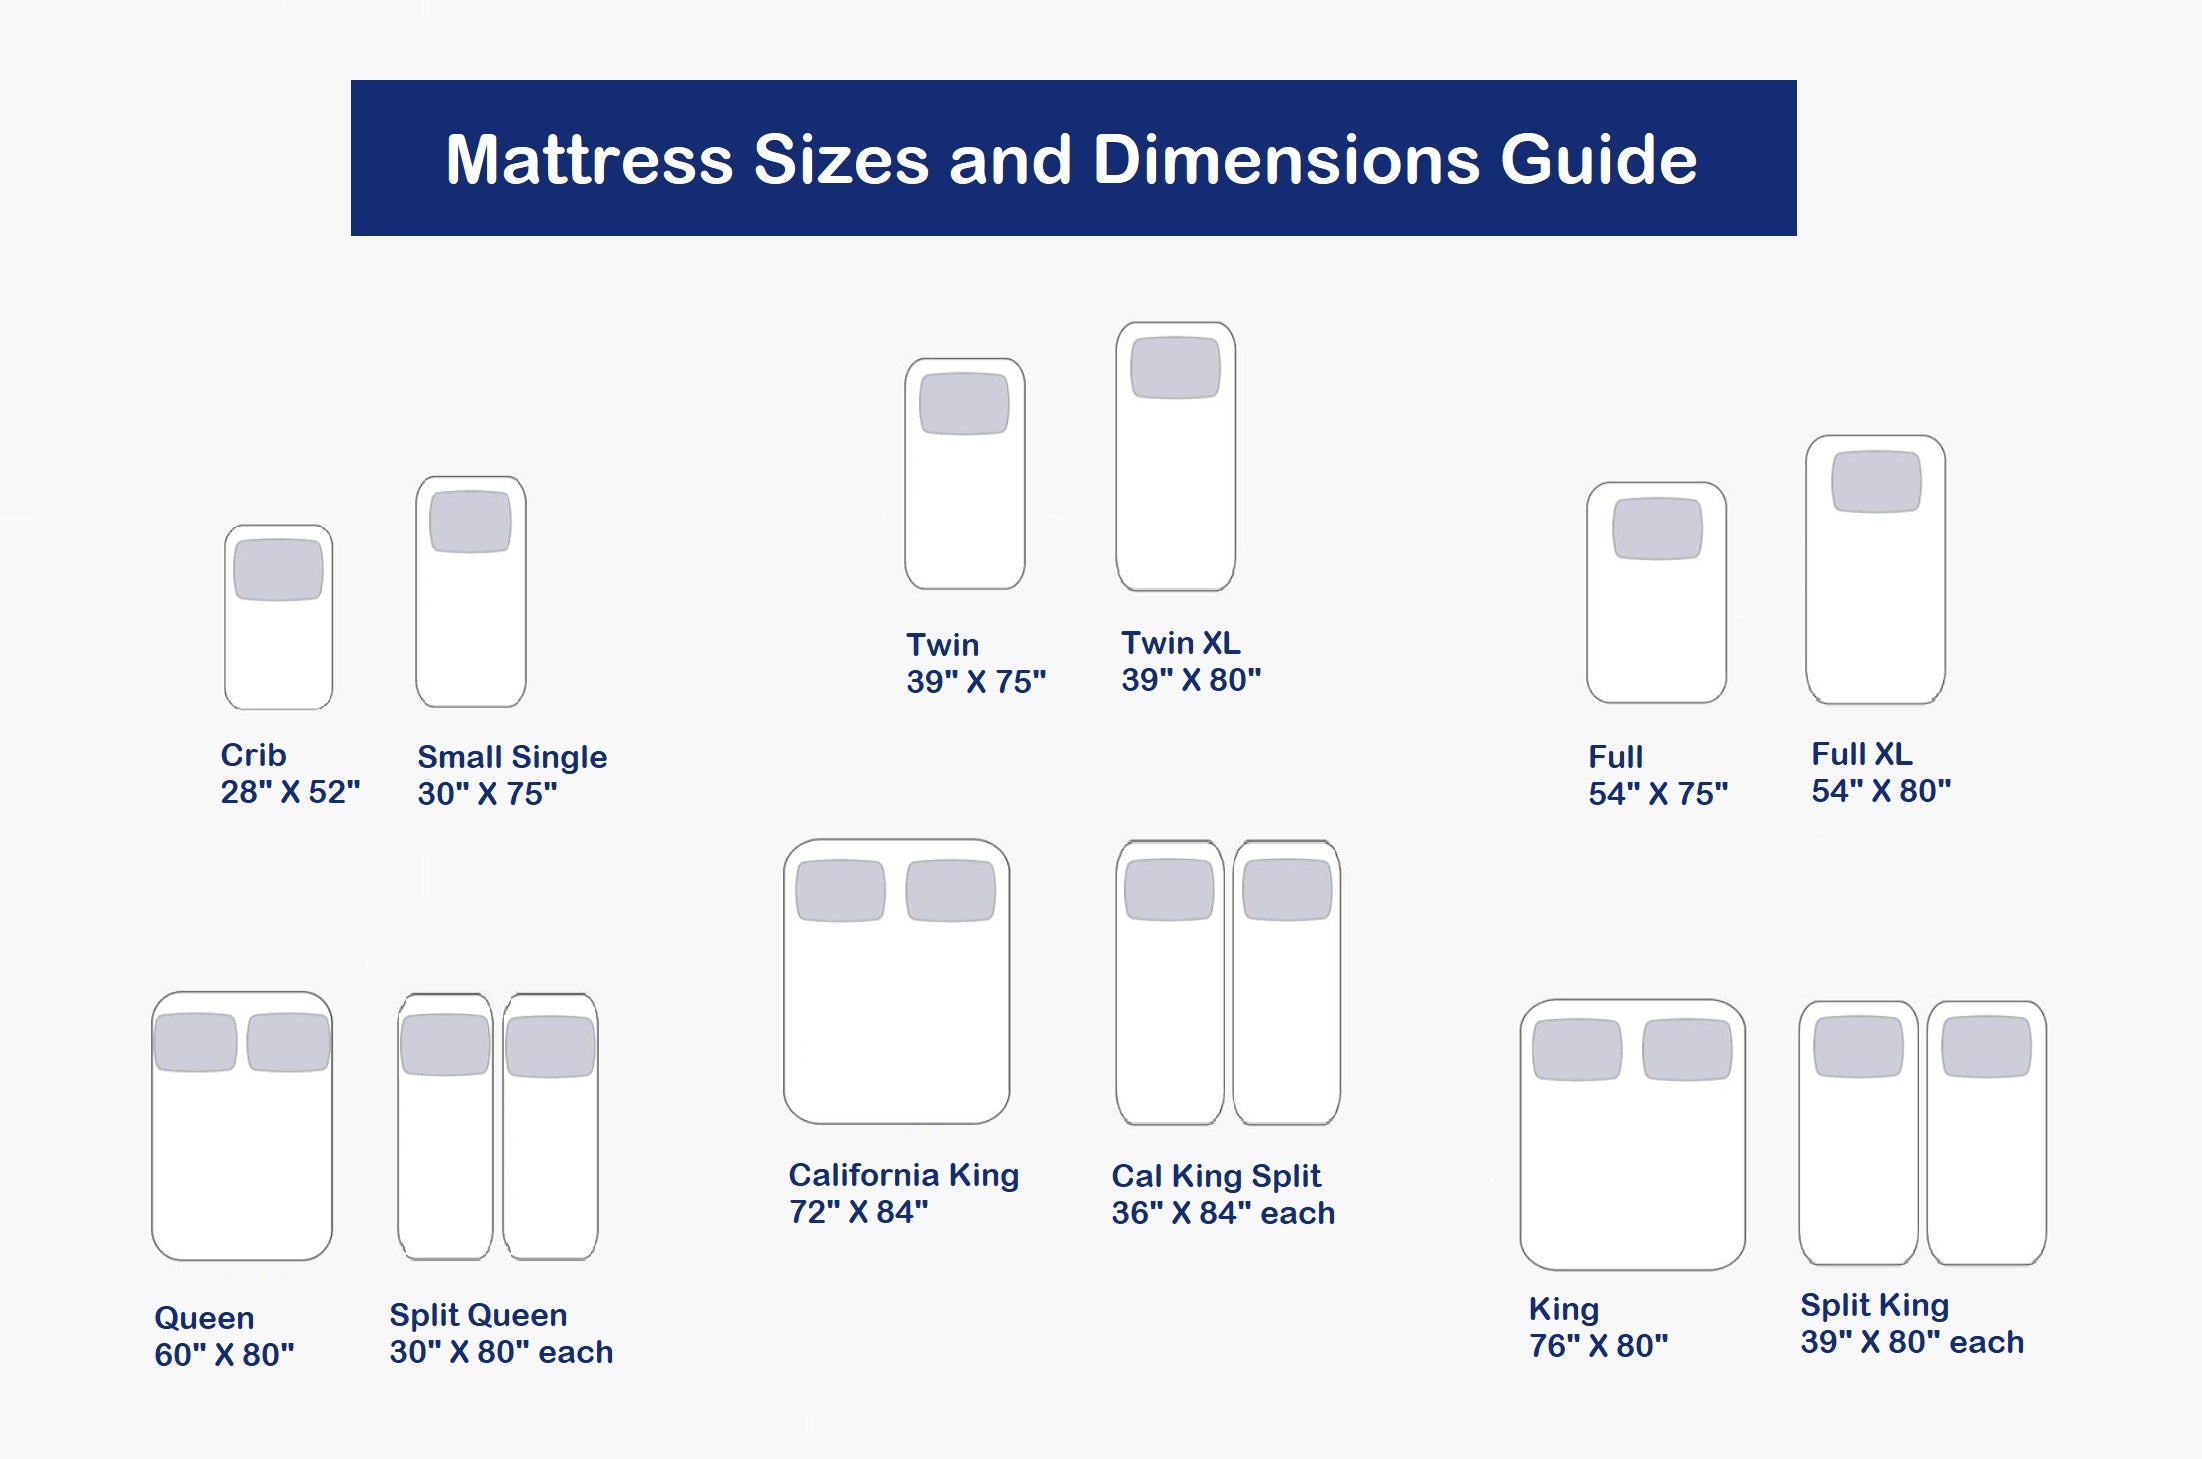 Difference Between King Size and Queen Size Beds